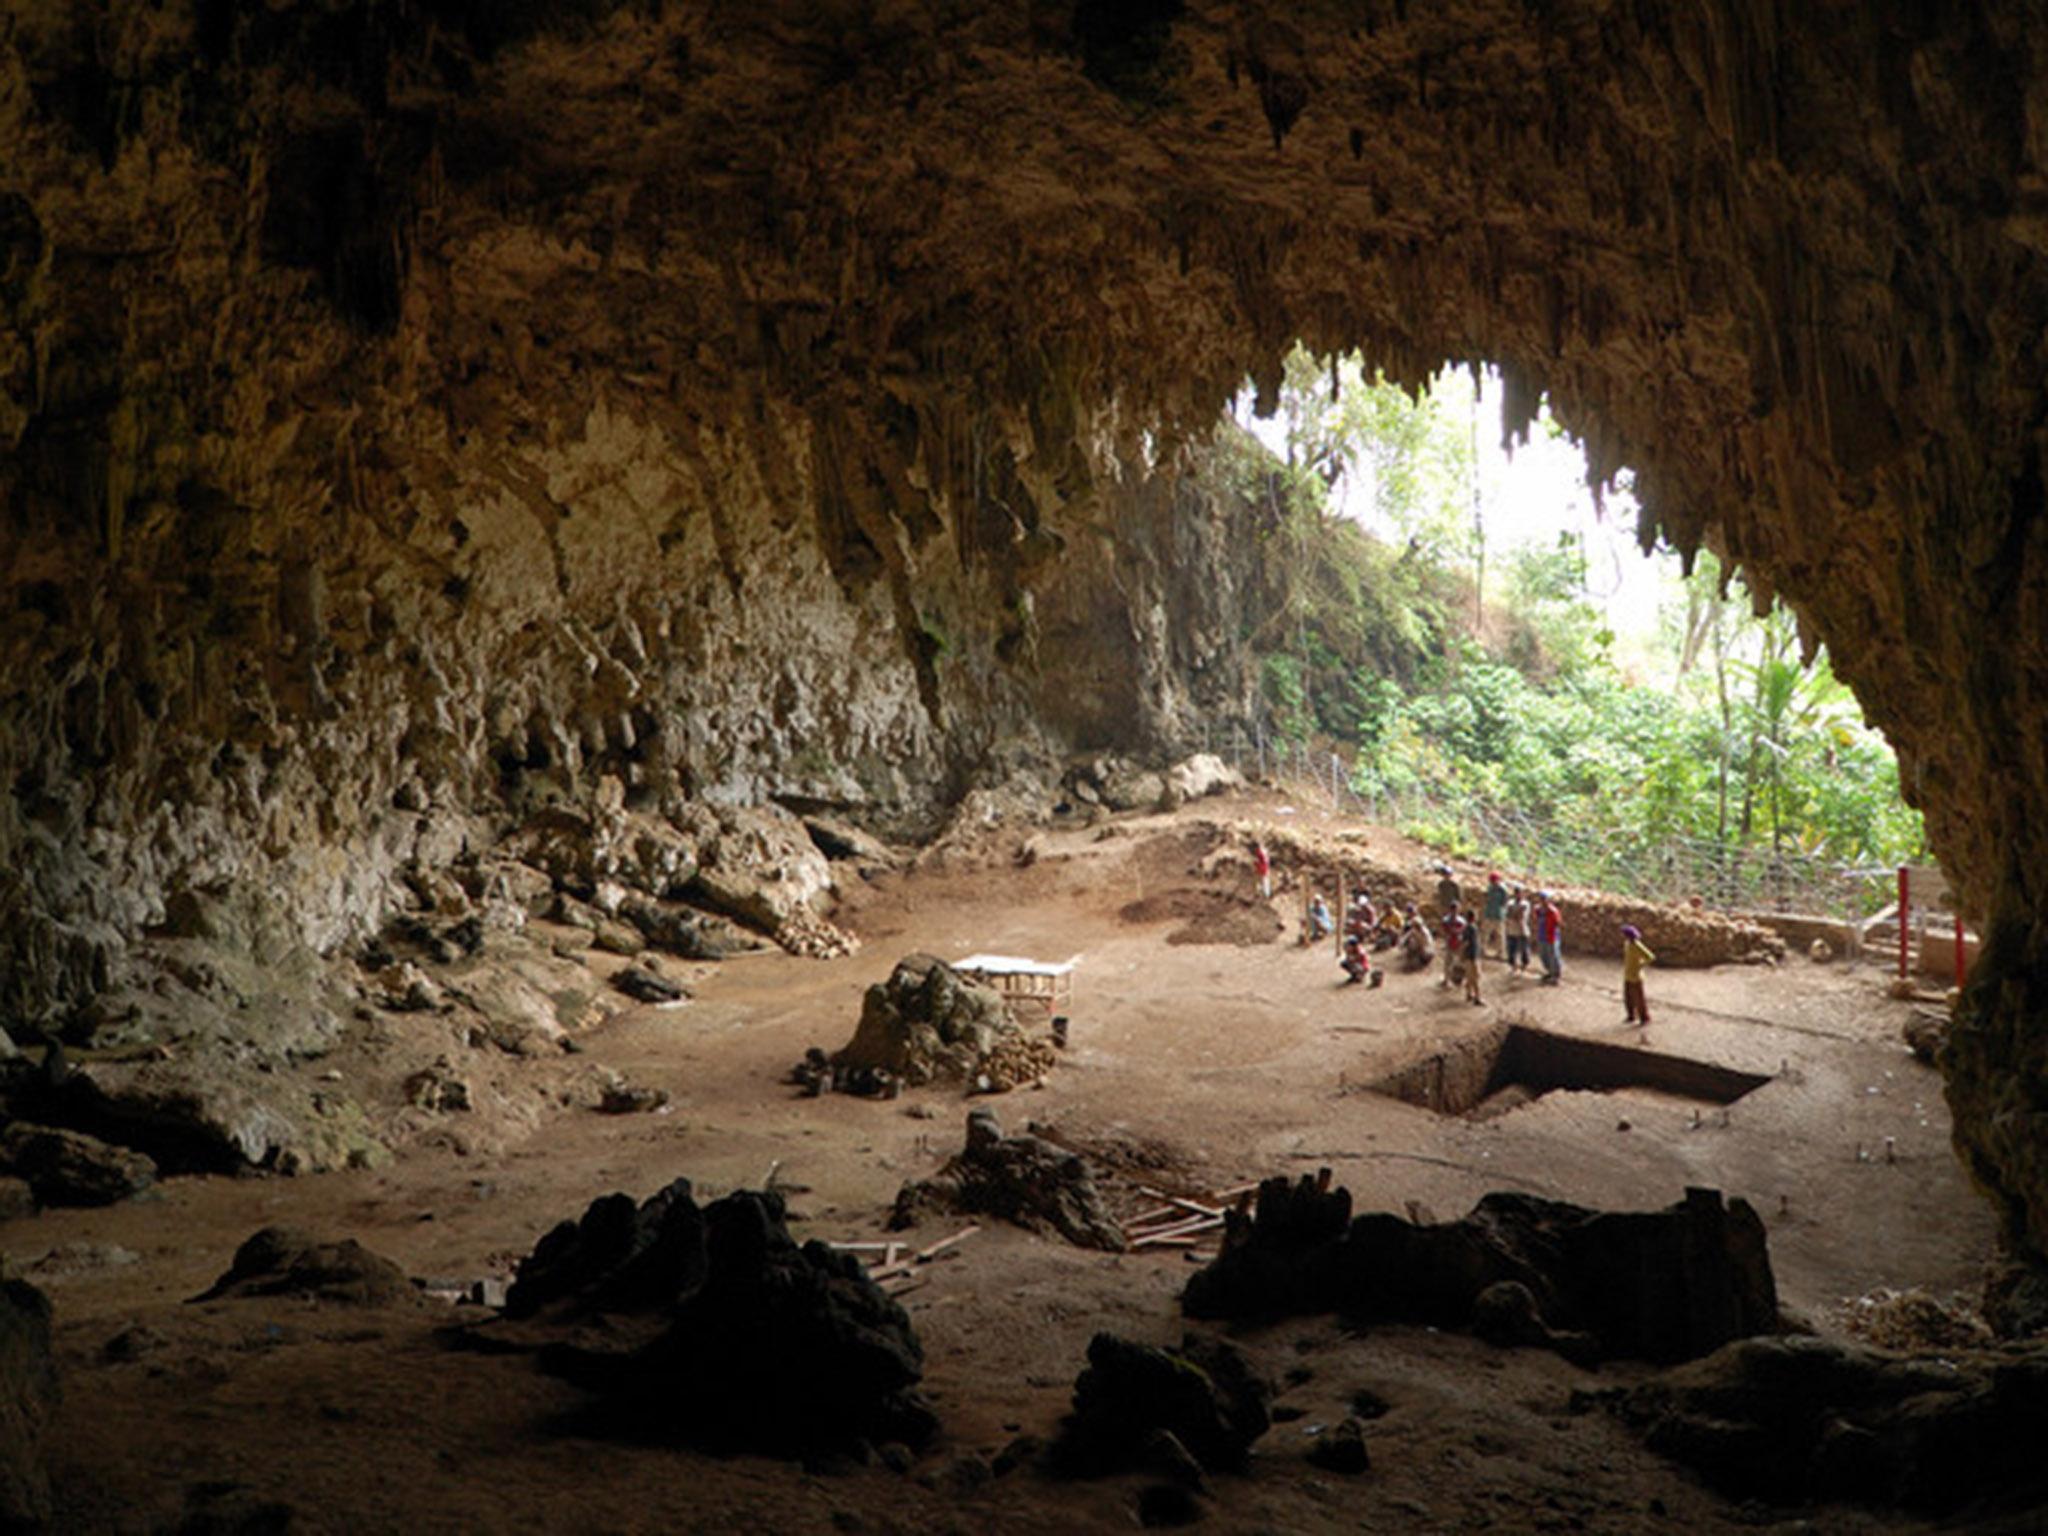 Liang Bua cave on the Indonesian island of Flores, where the new species of small Hominin was discovered